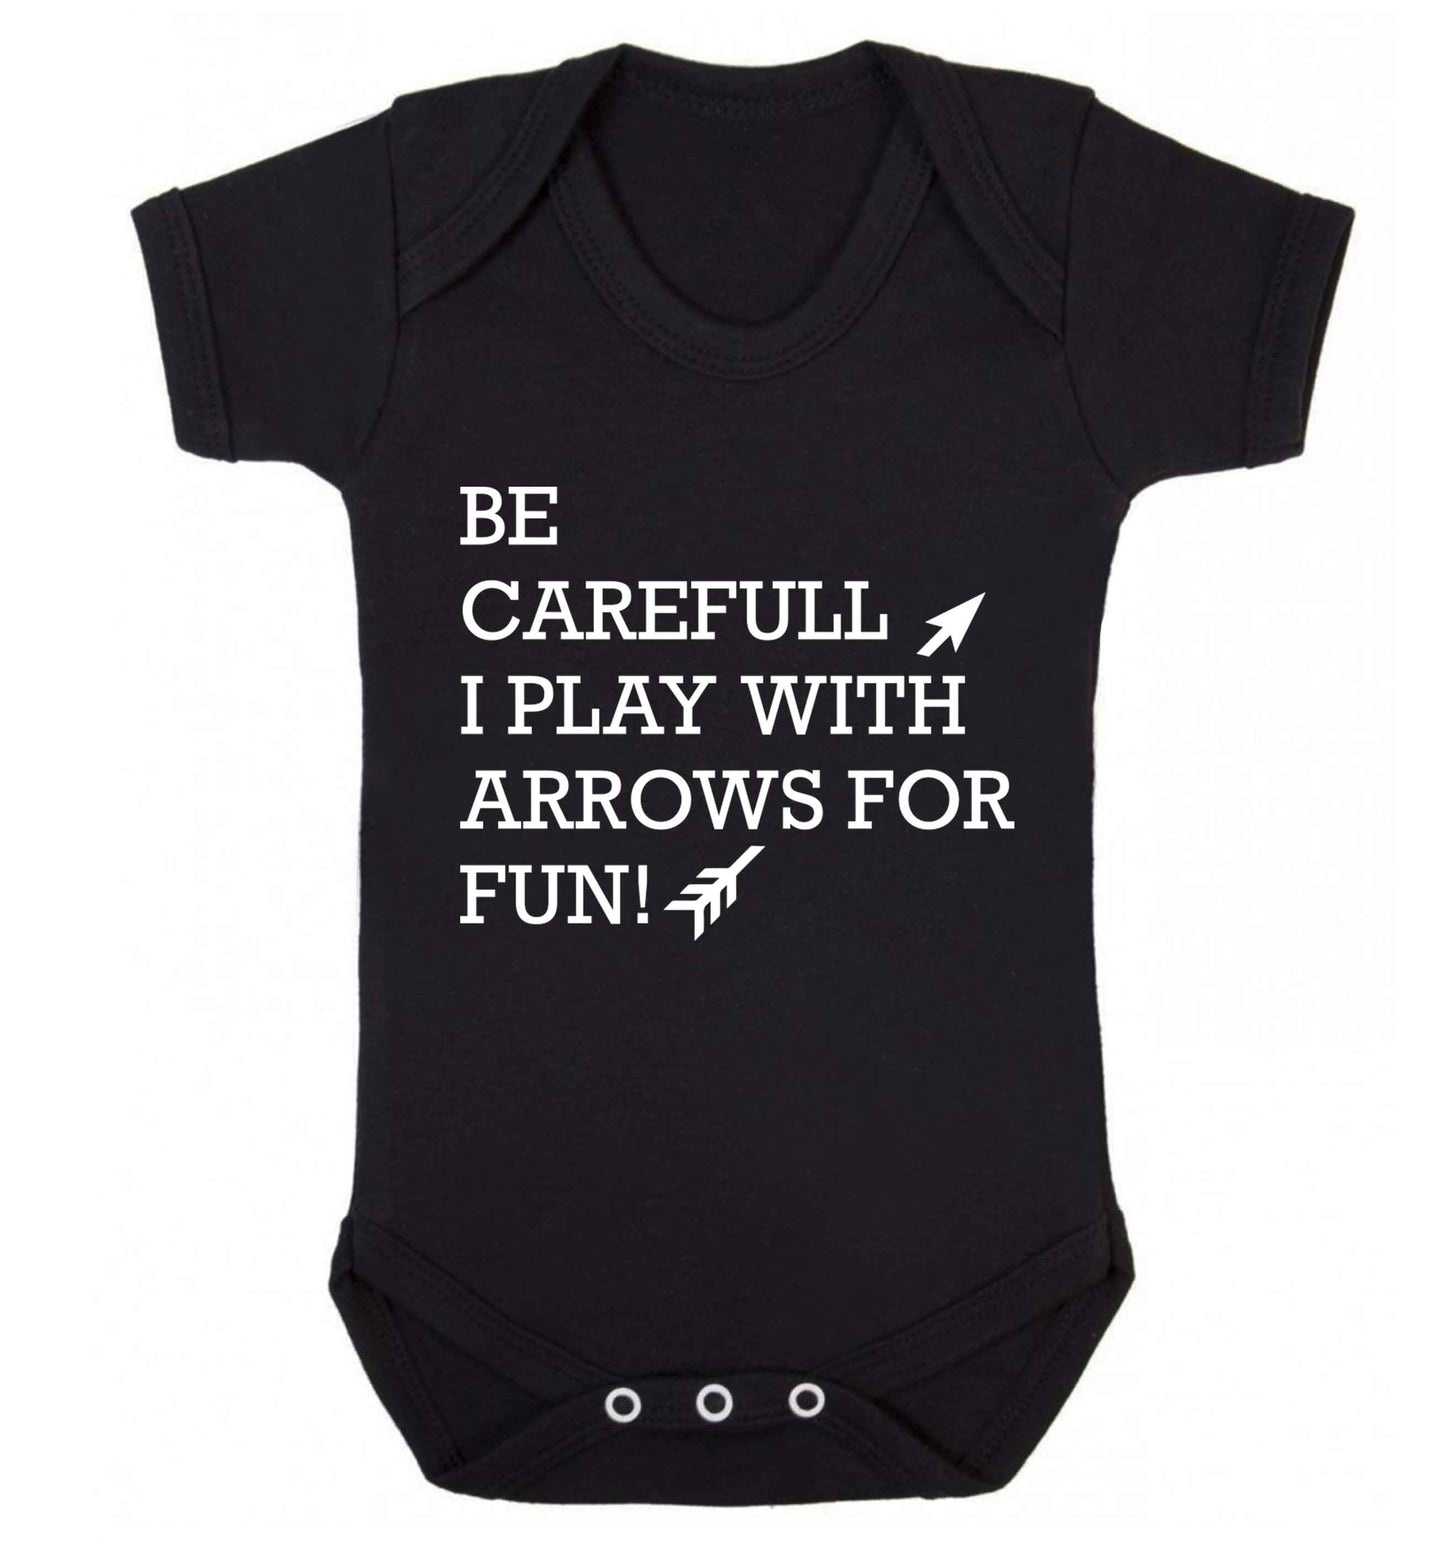 Be carefull I play with arrows for fun Baby Vest black 18-24 months